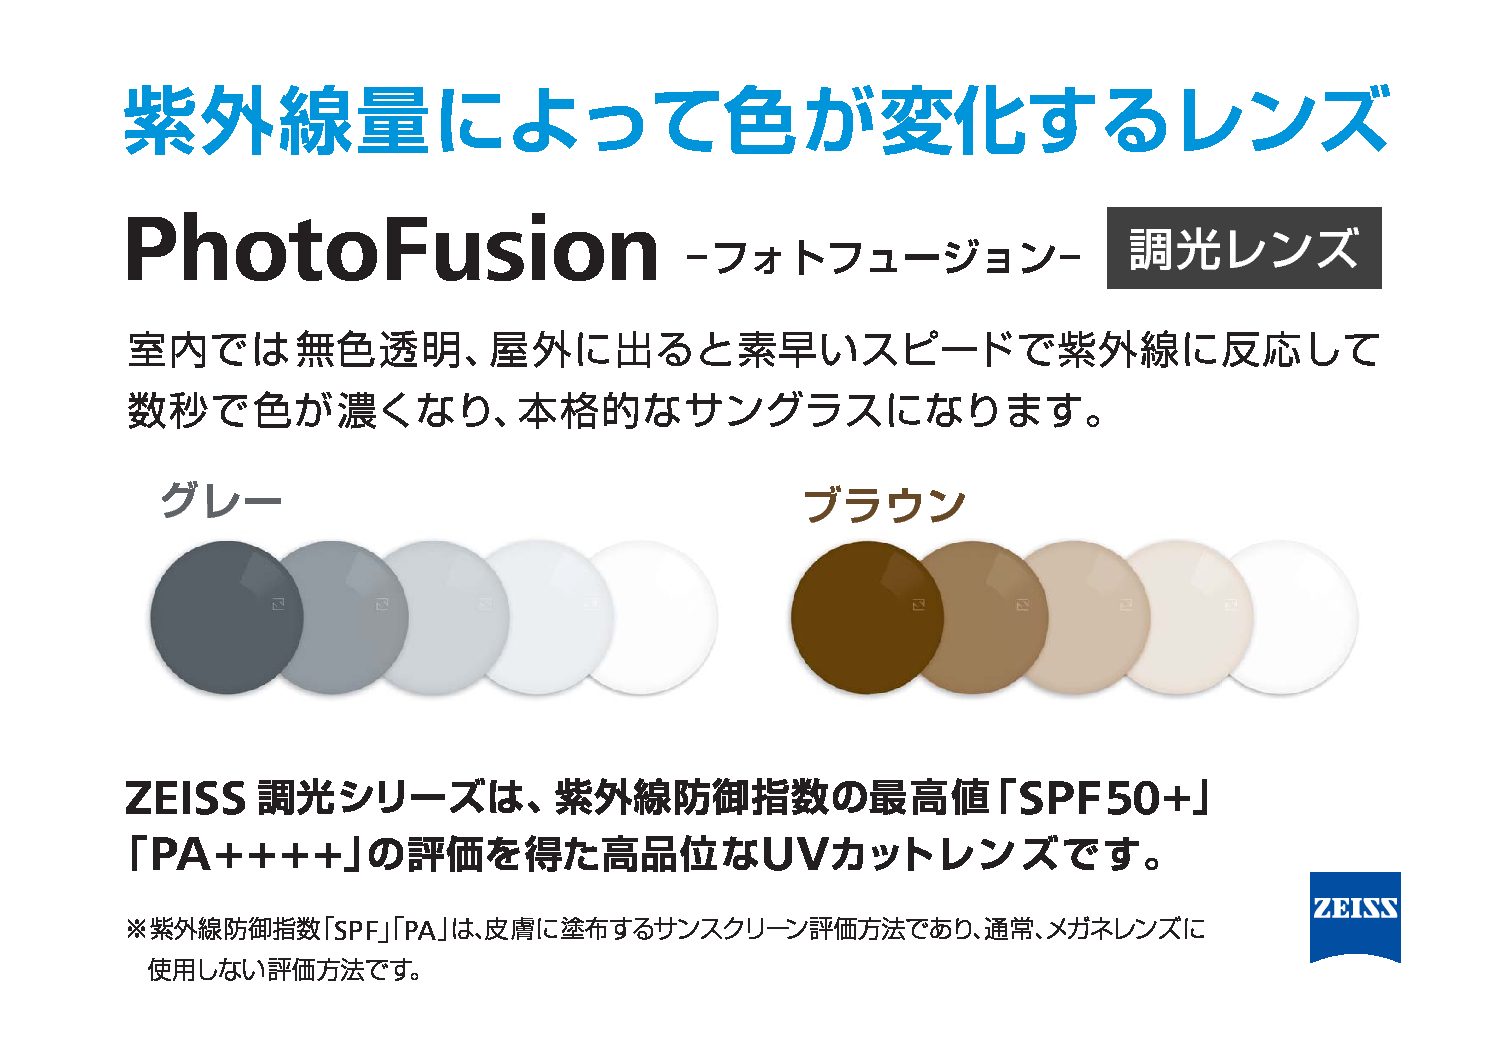 Green Optical Zeiss 調光レンズフェア 開催